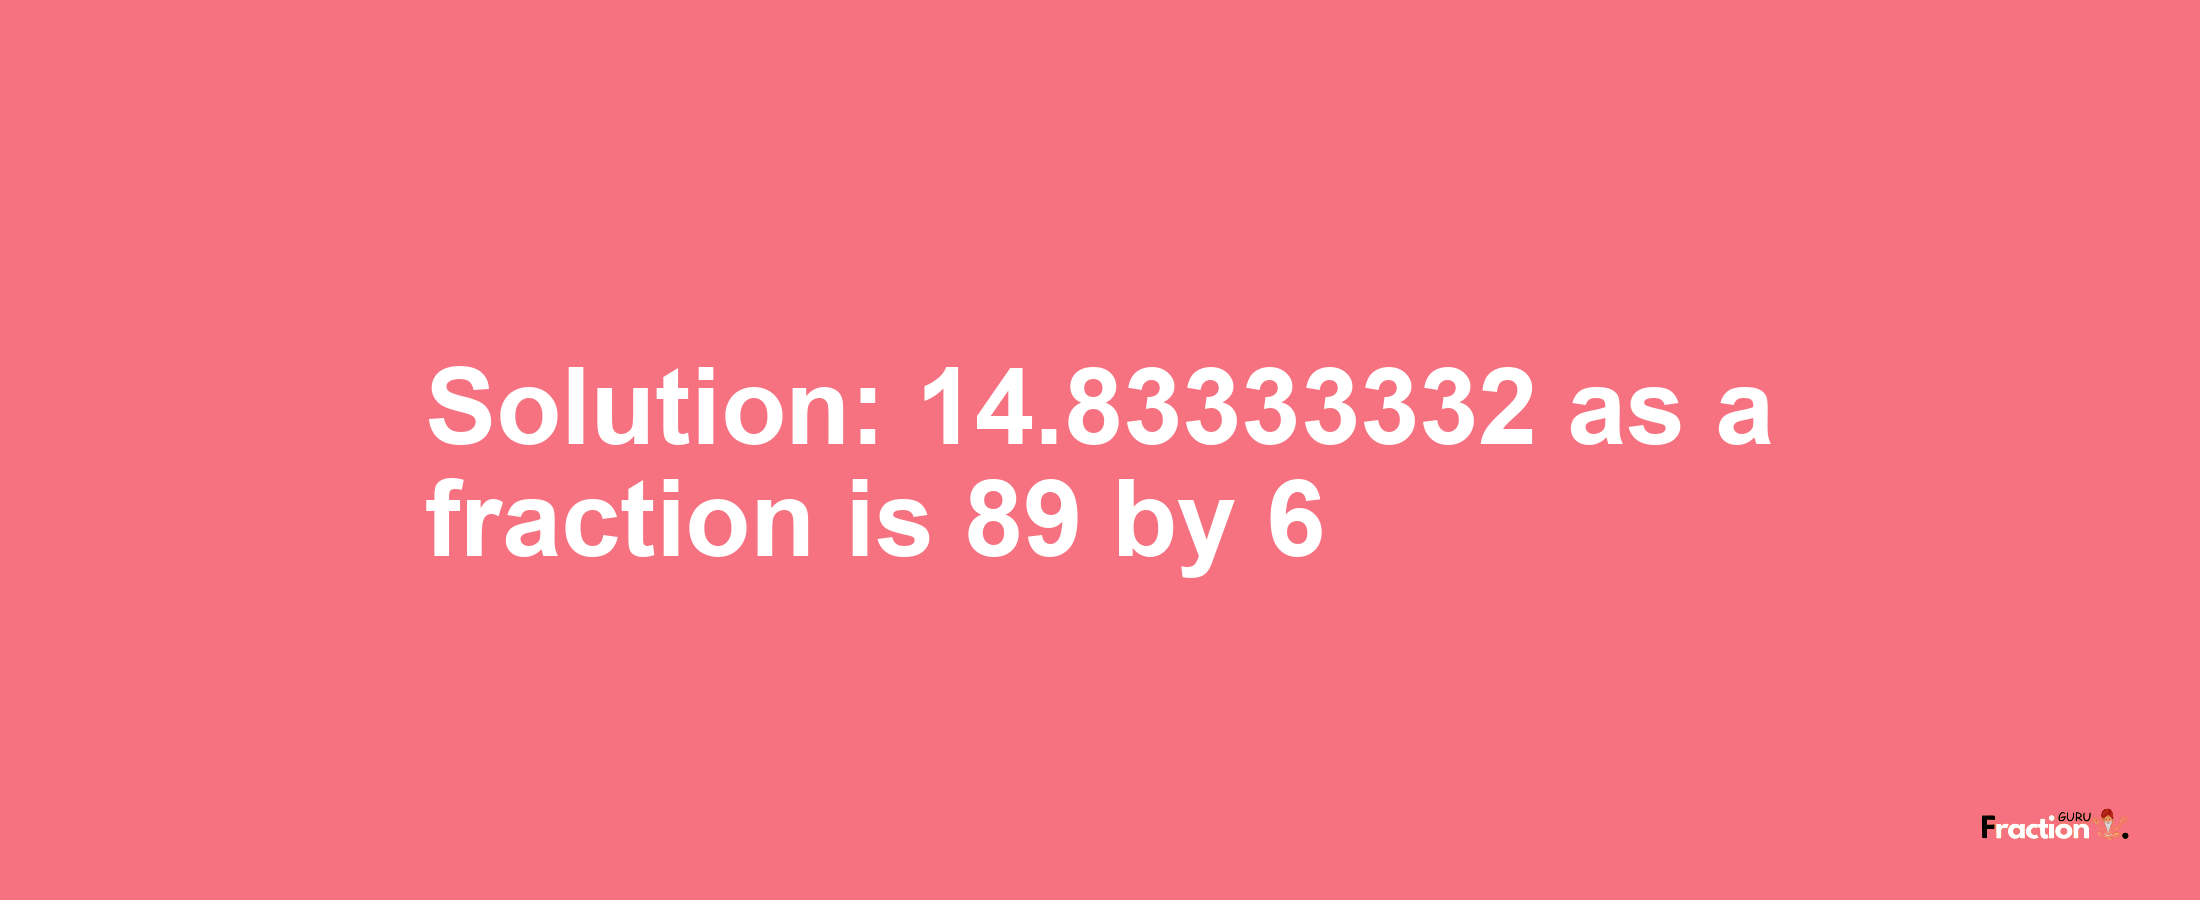 Solution:14.83333332 as a fraction is 89/6